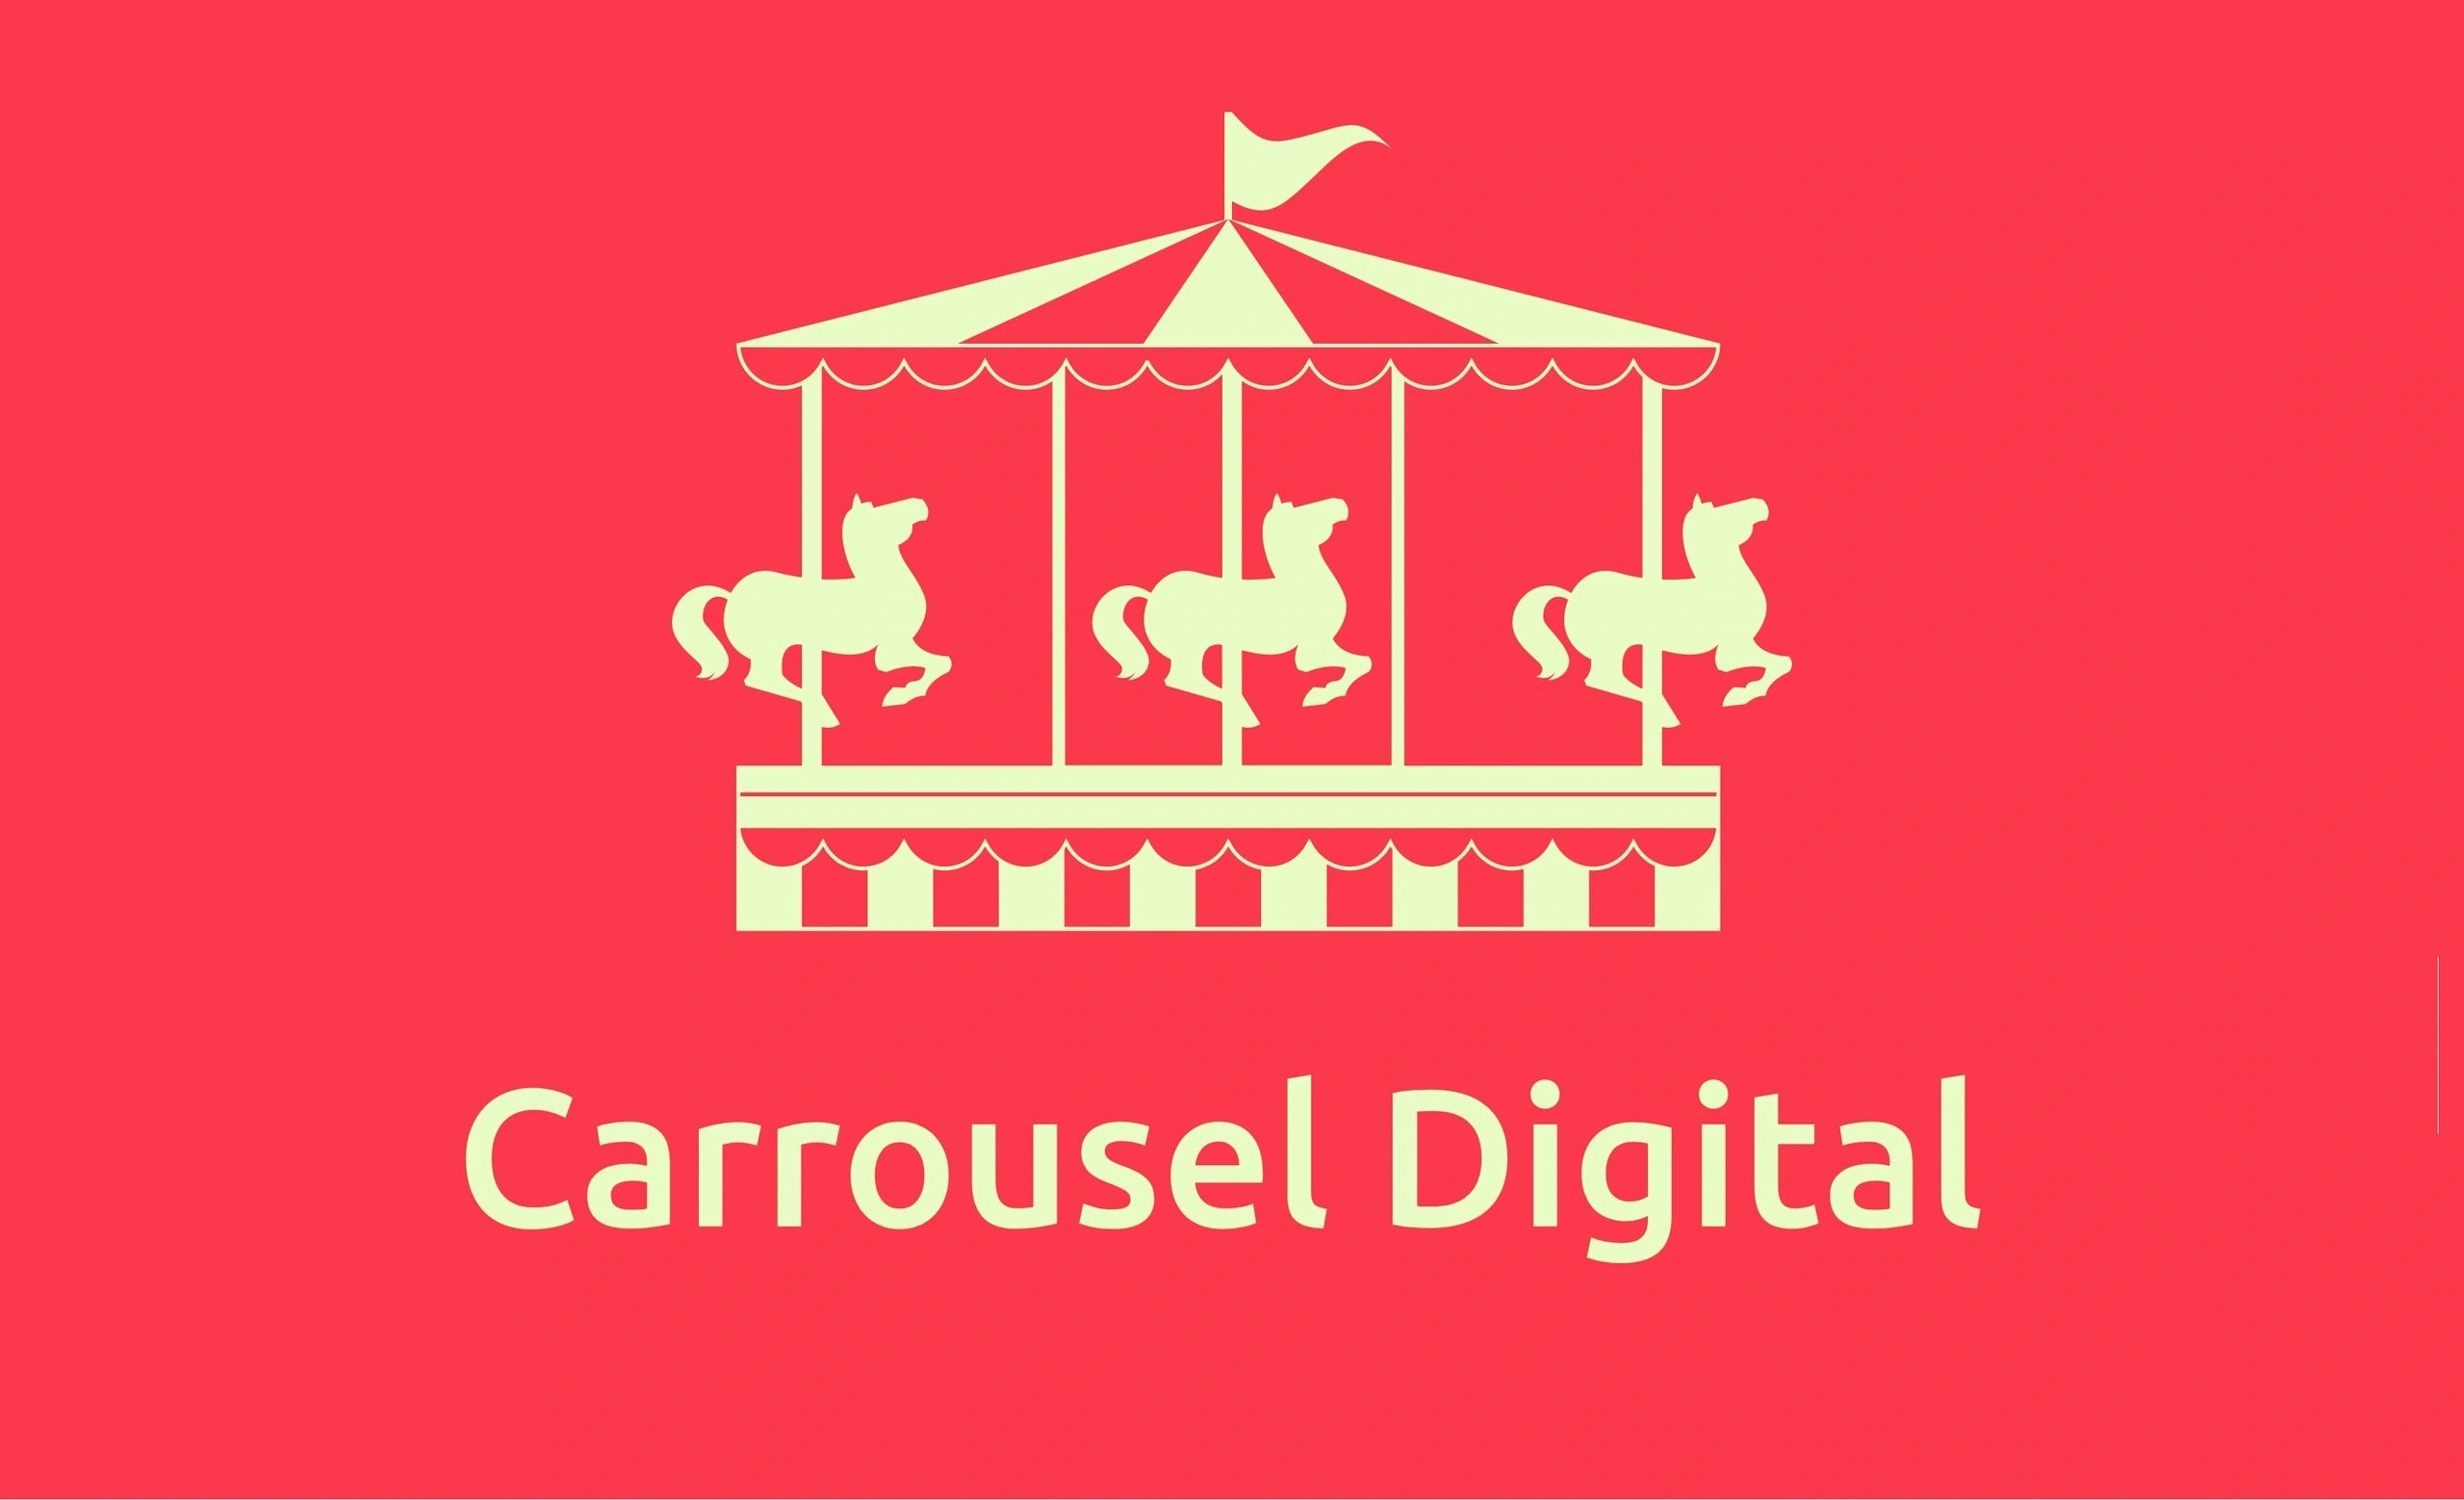 Carrousel Digital announces the next step in electronic payment systems